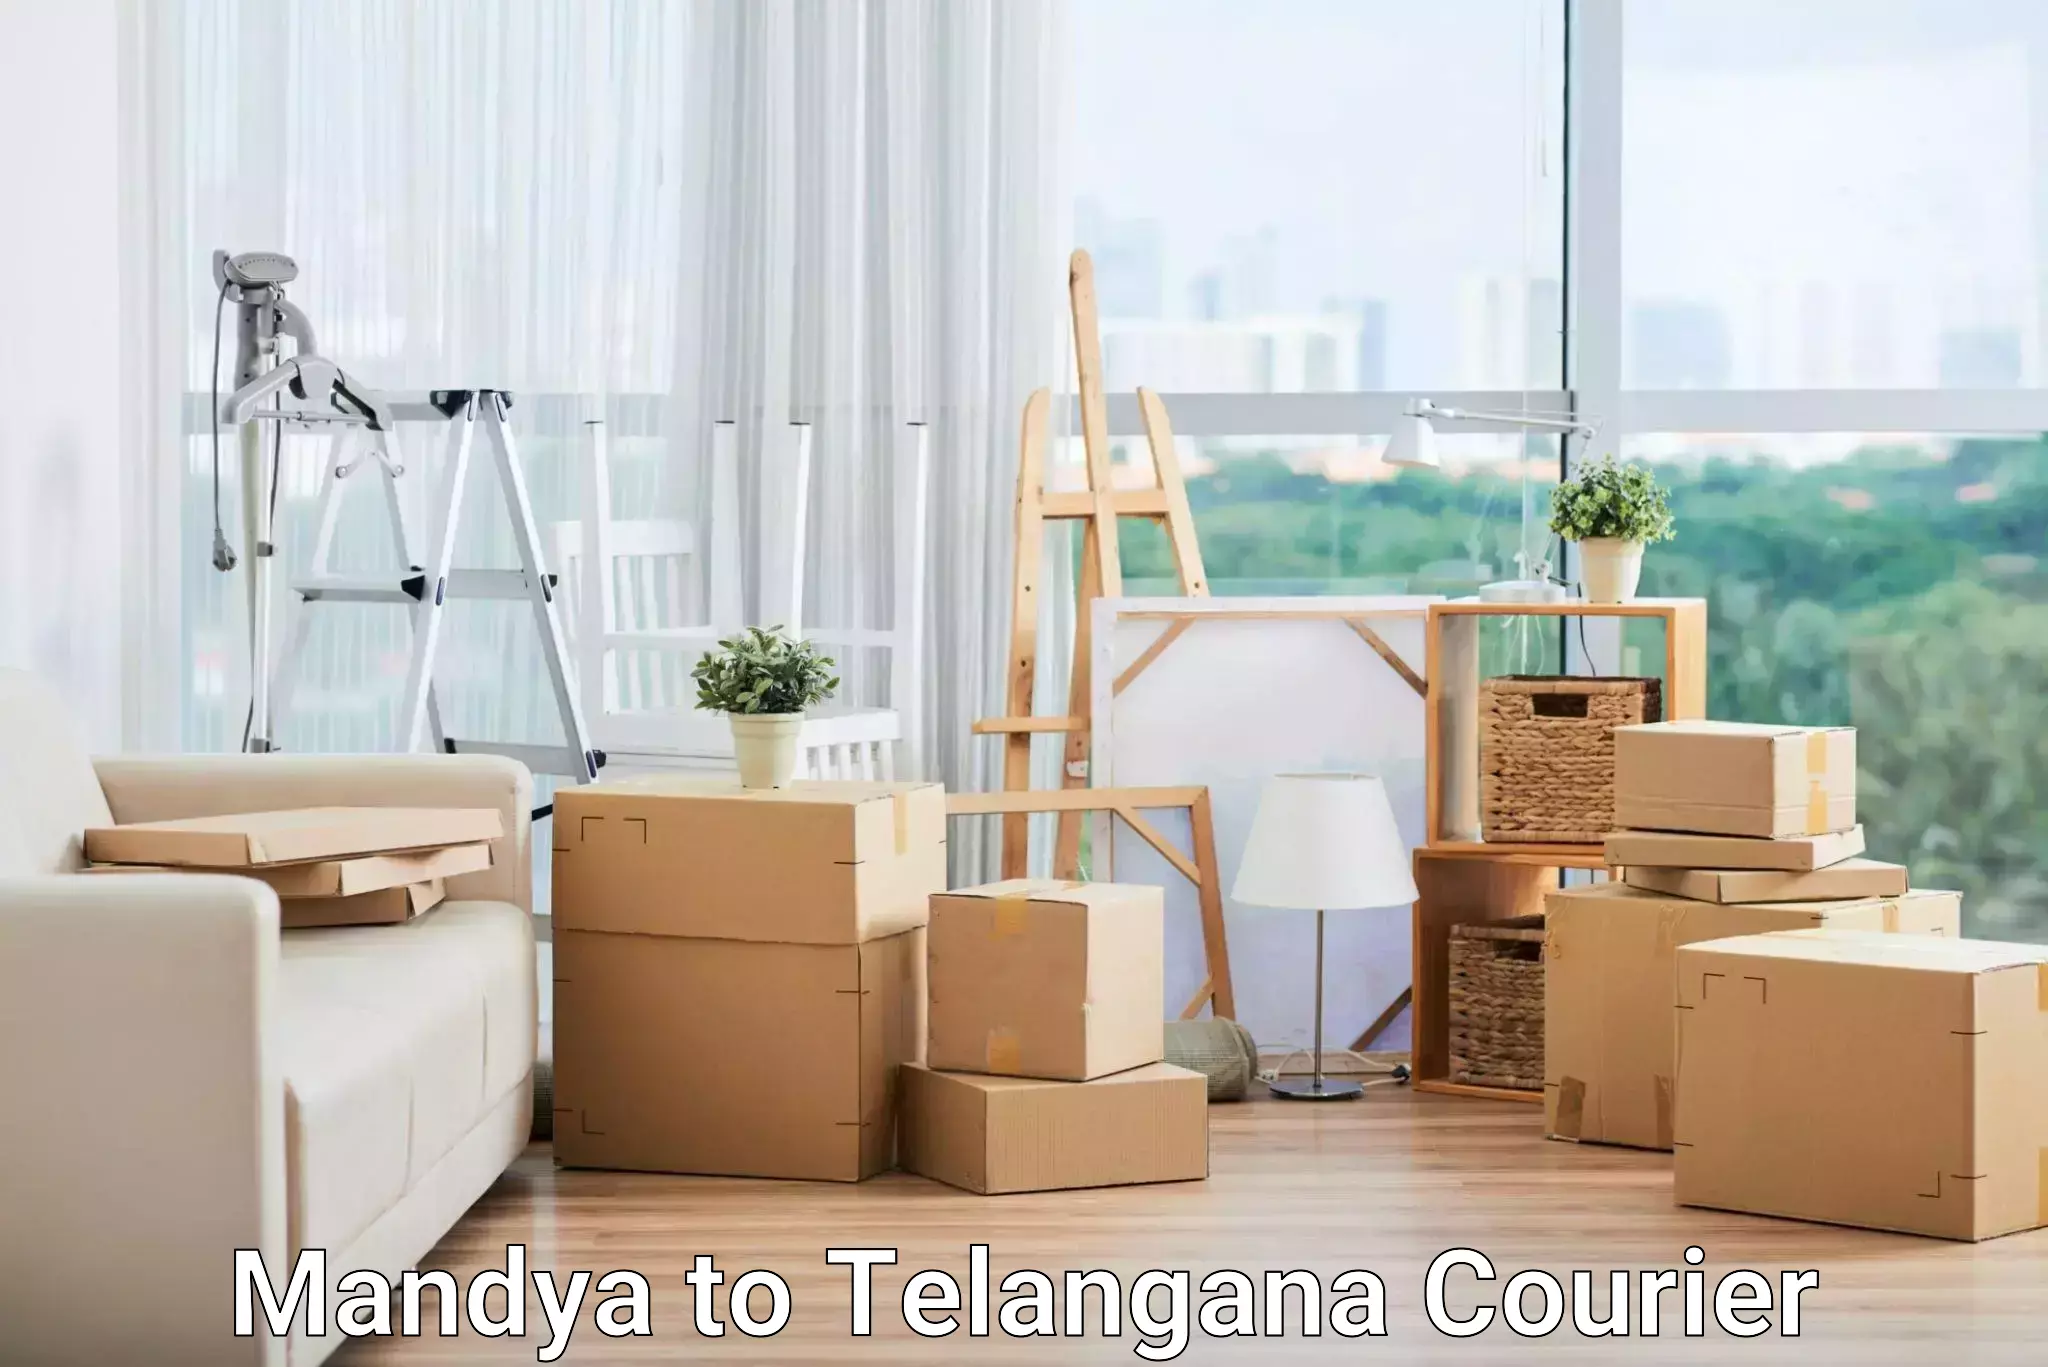 State-of-the-art courier technology Mandya to Atmakur Wanaparthy